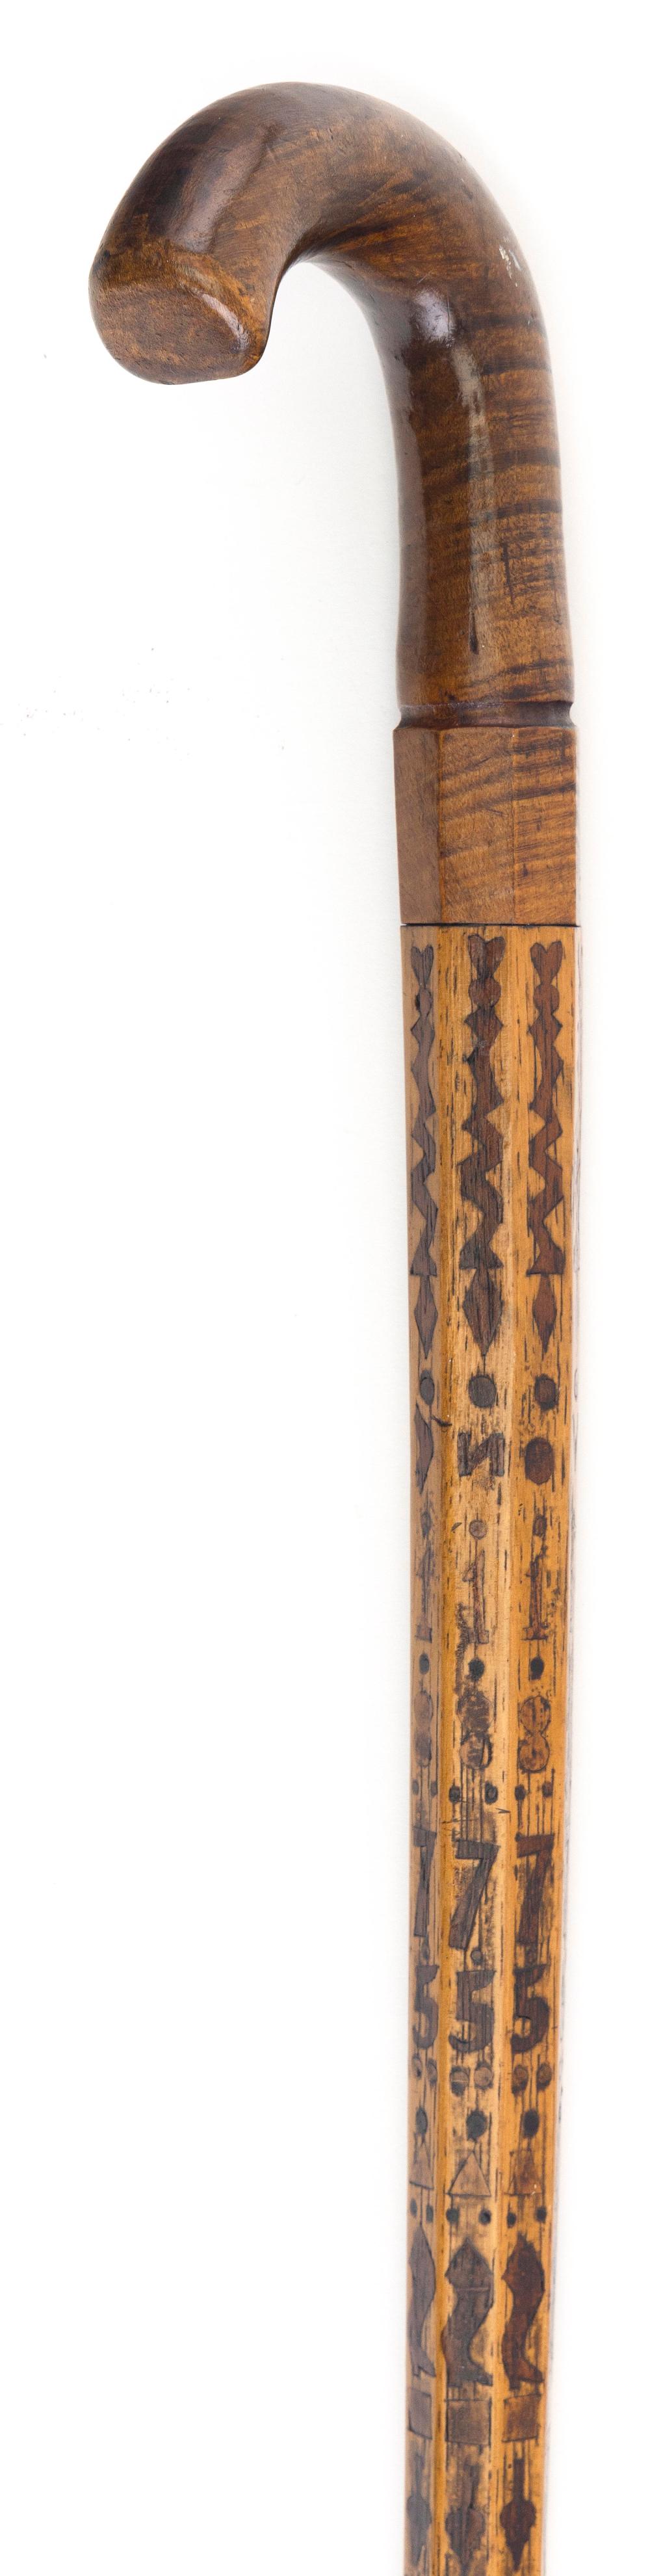 MARQUETRY CANE DATED 1875 LENGTH